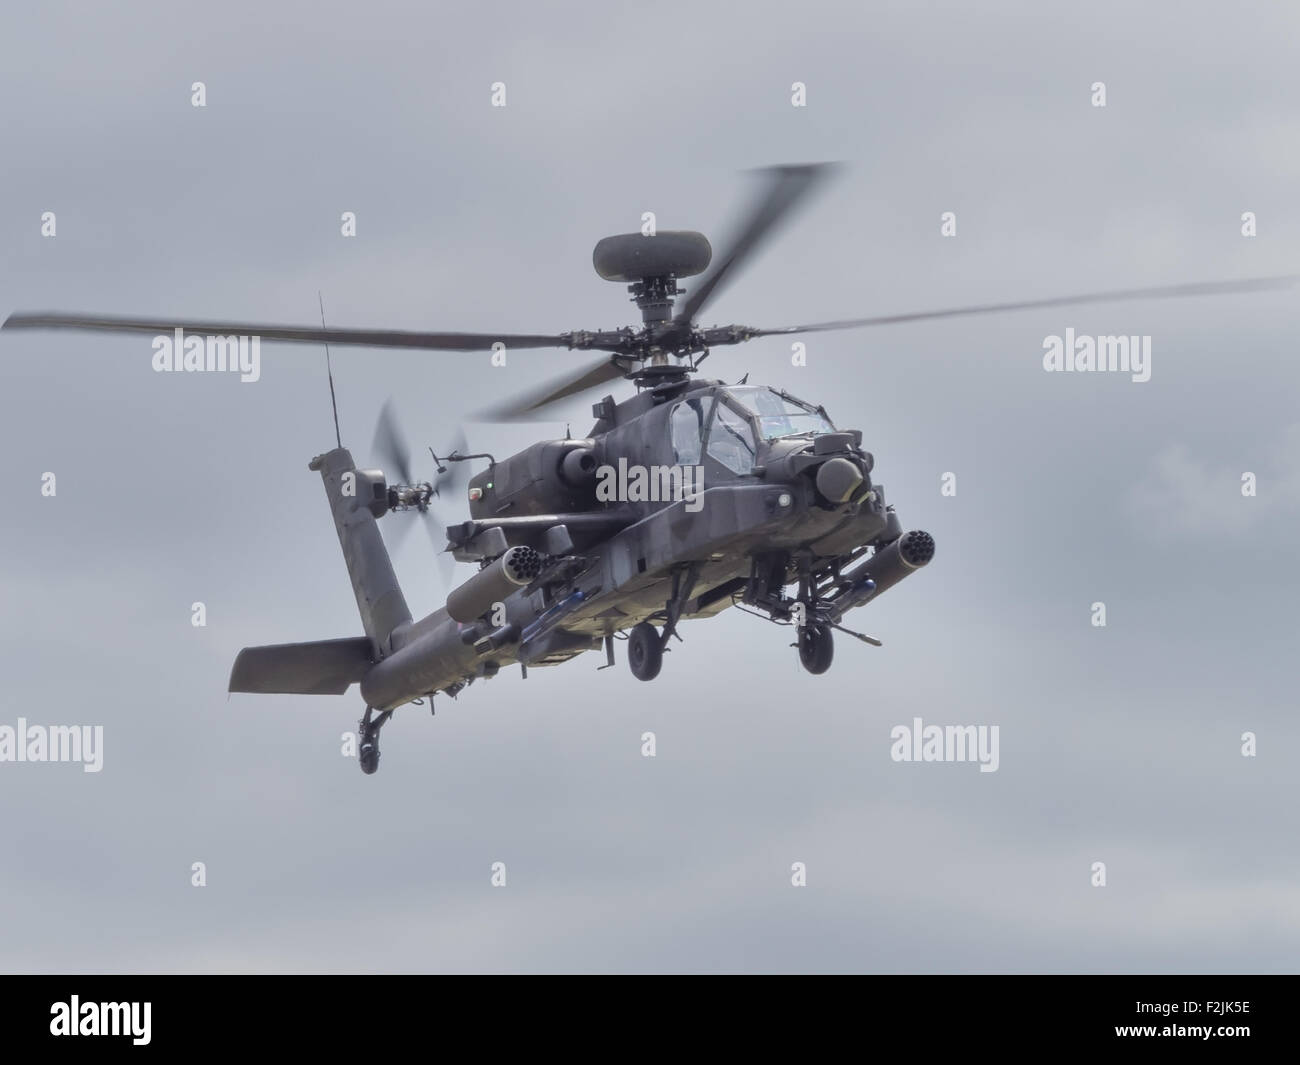 Yeovilton, UK - 11th July 2015: Apache helicopter flying at Yeovilton Air Day. Stock Photo